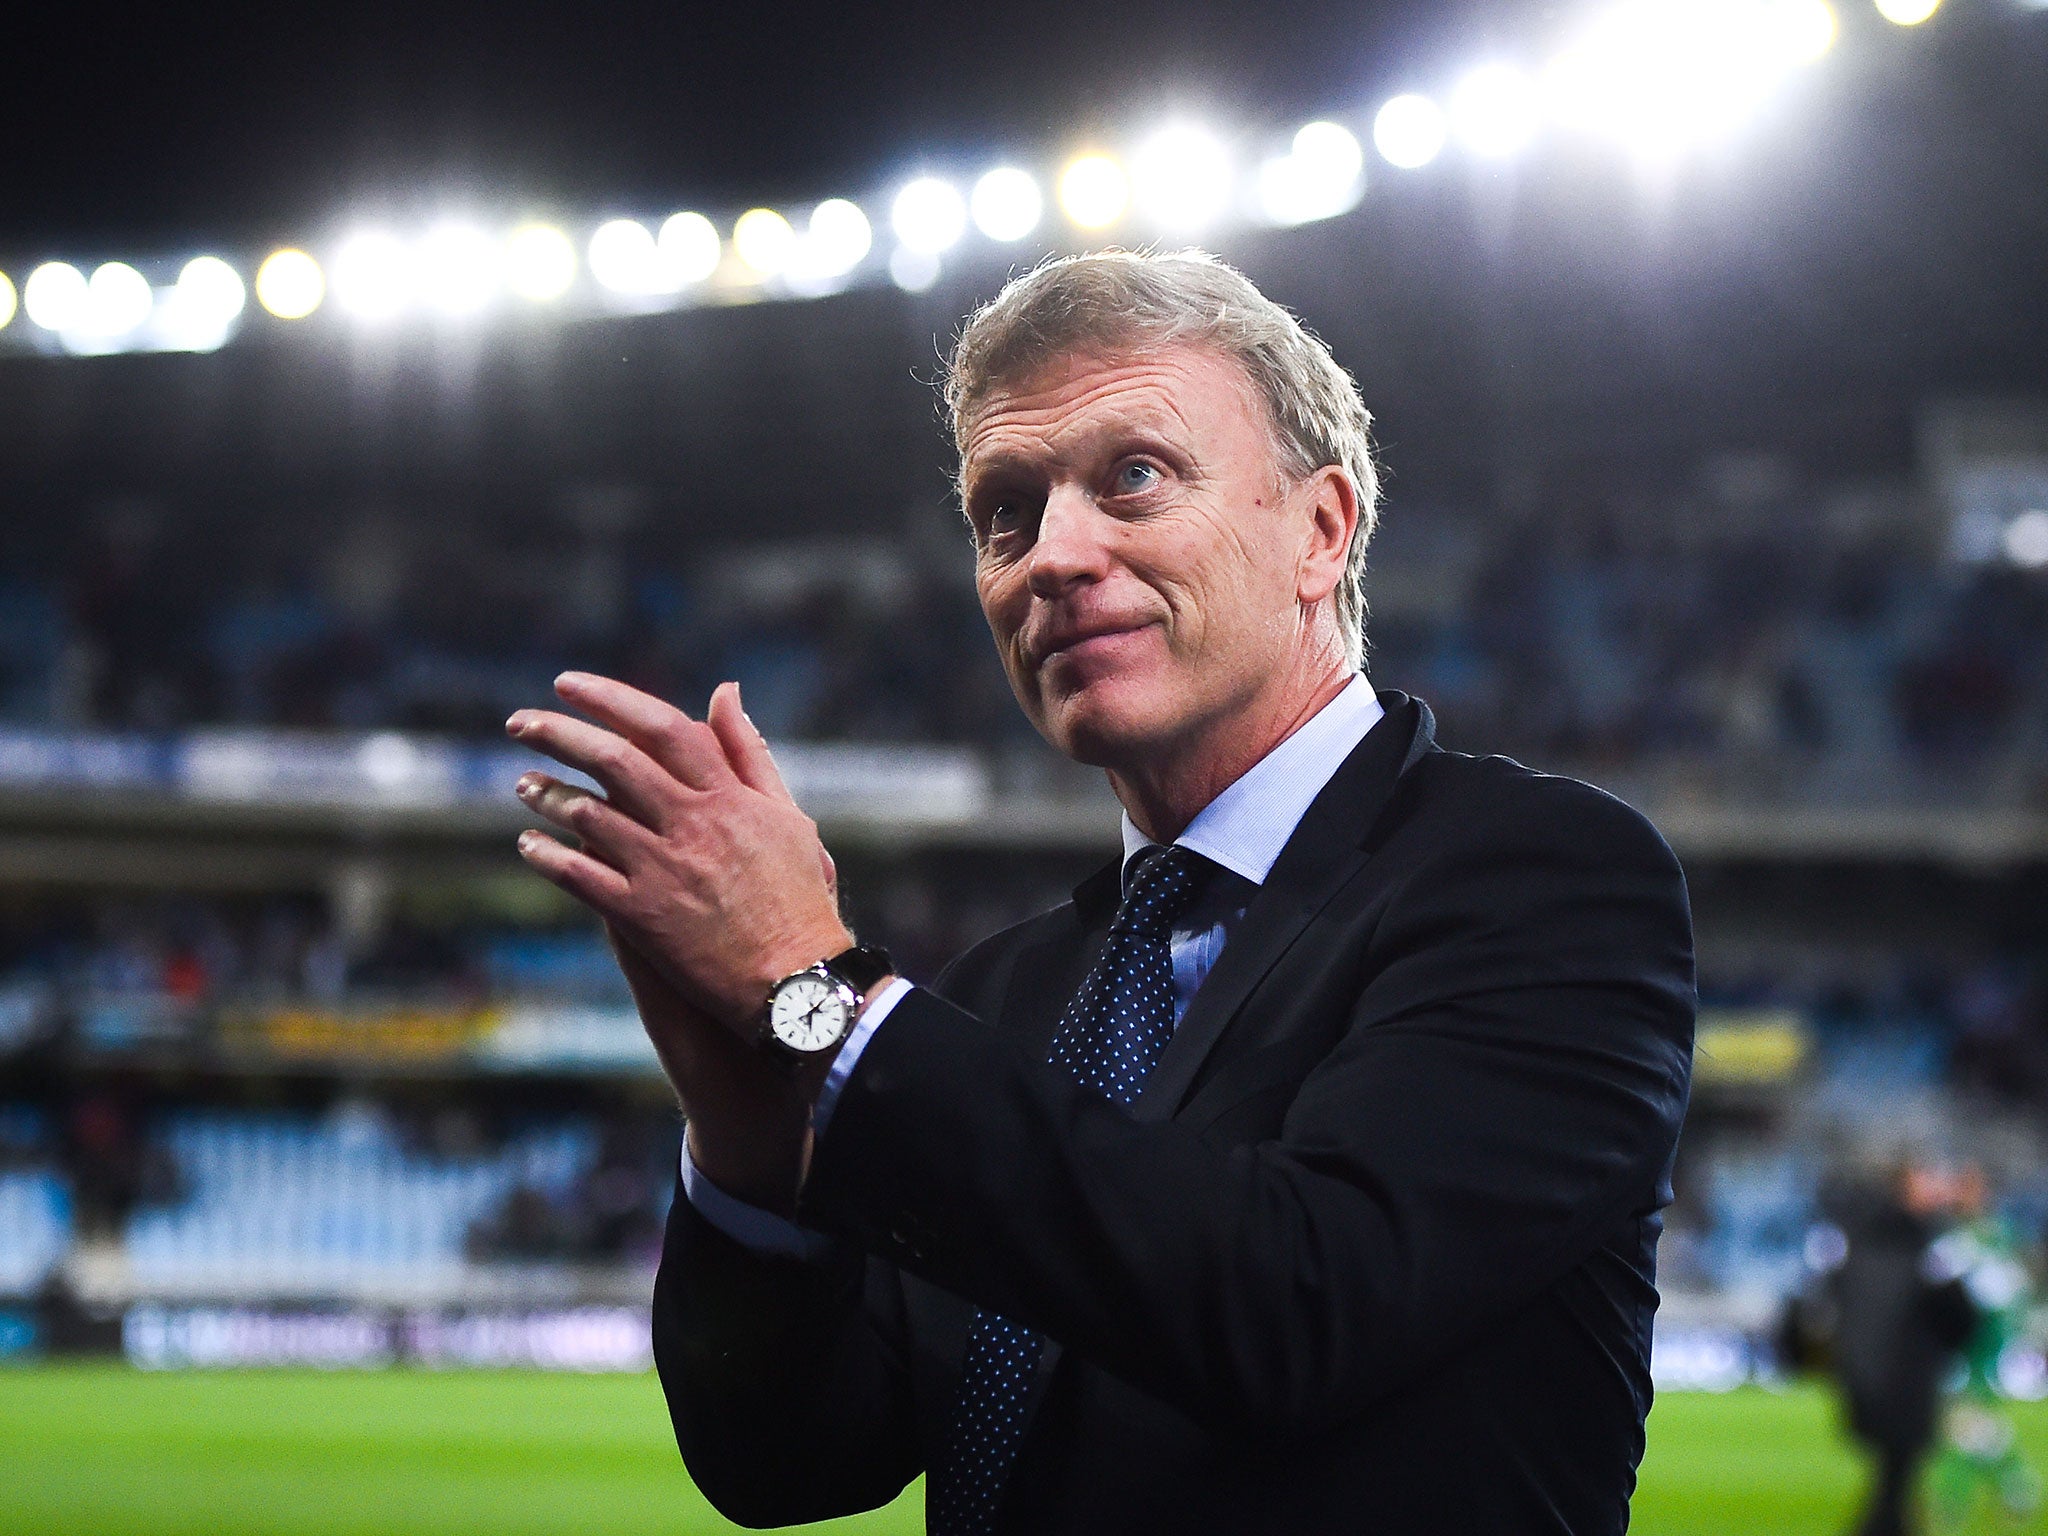 David Moyes applauds the Real Socidedad crowd